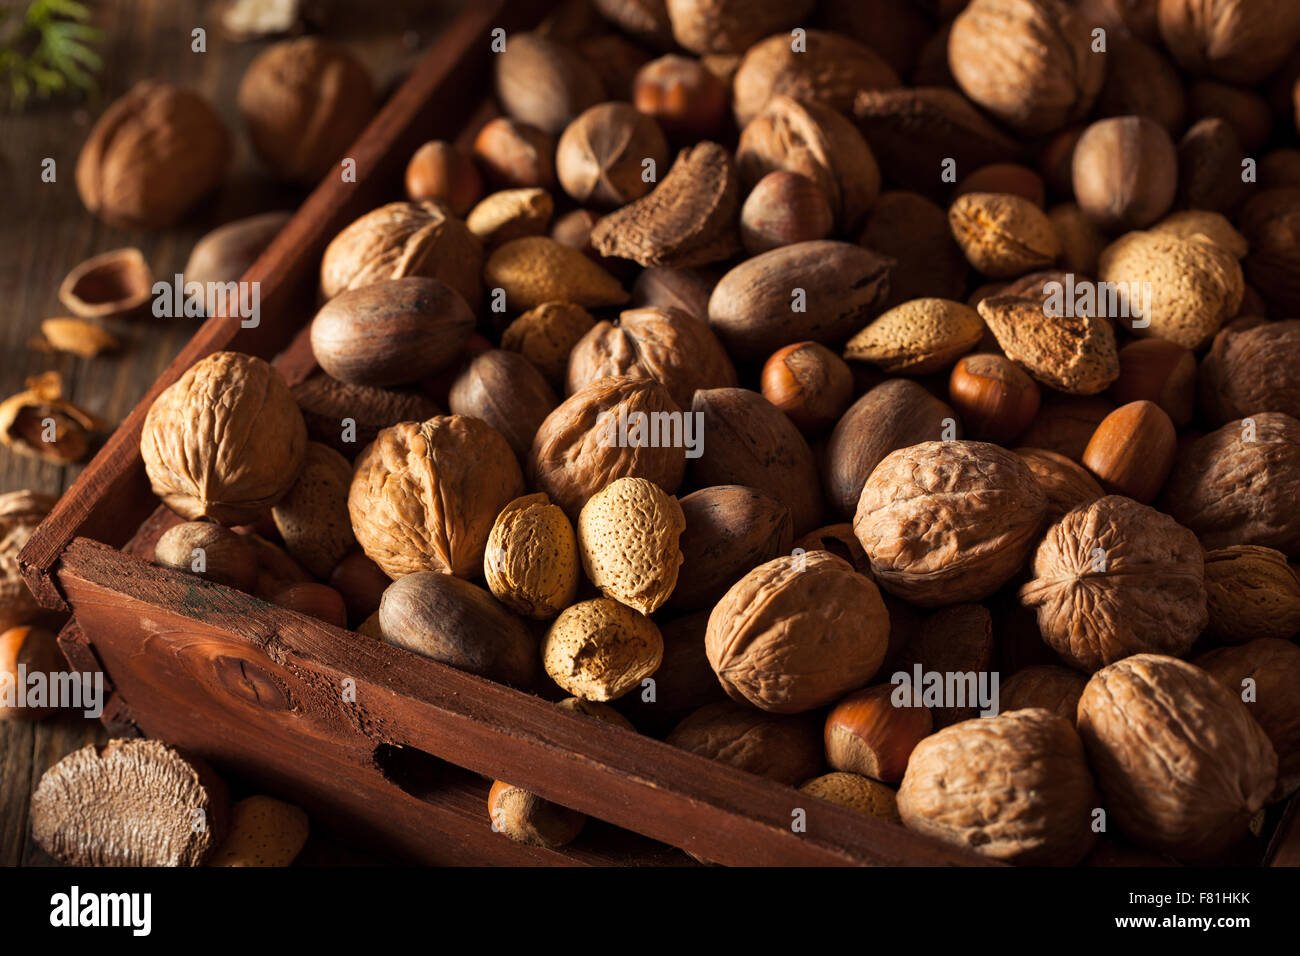 Assorted Mixed Organic Nuts with Walnuts Almonds and Pecans Stock Photo